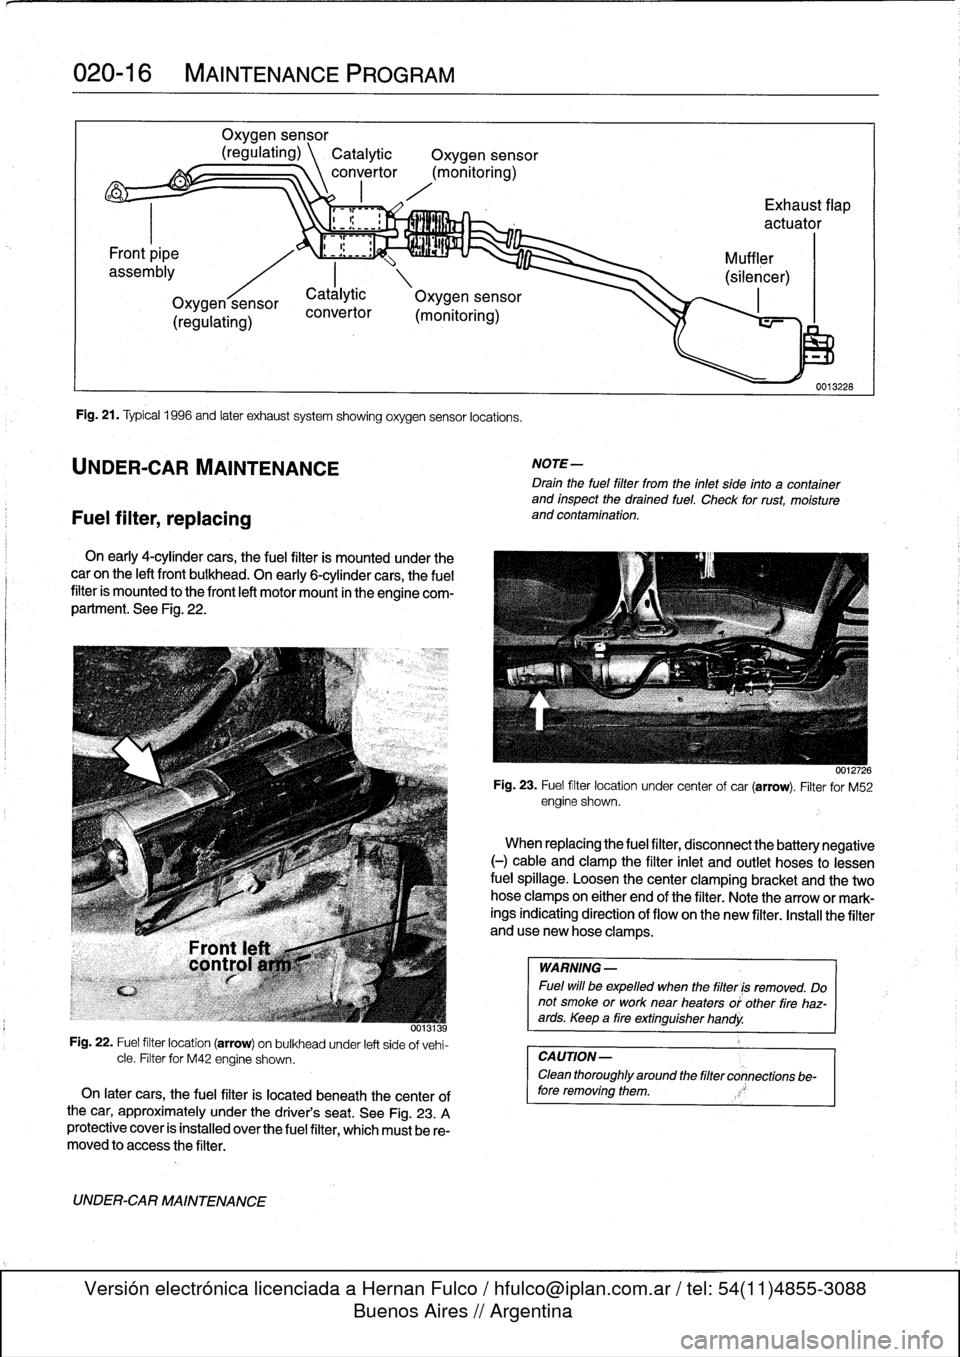 BMW 318i 1998 E36 Workshop Manual 
020-
1
6

	

MAINTENANCE
PROGRAM

Fuel
filter,
replacing

Oxygen
sensor

(regulating)
\
Catalytic

	

Oxygen
sensor
convertor
(monitoring)

Fig
.
21
.
Typical
1996
and
later
exhaust
system
showing
ox